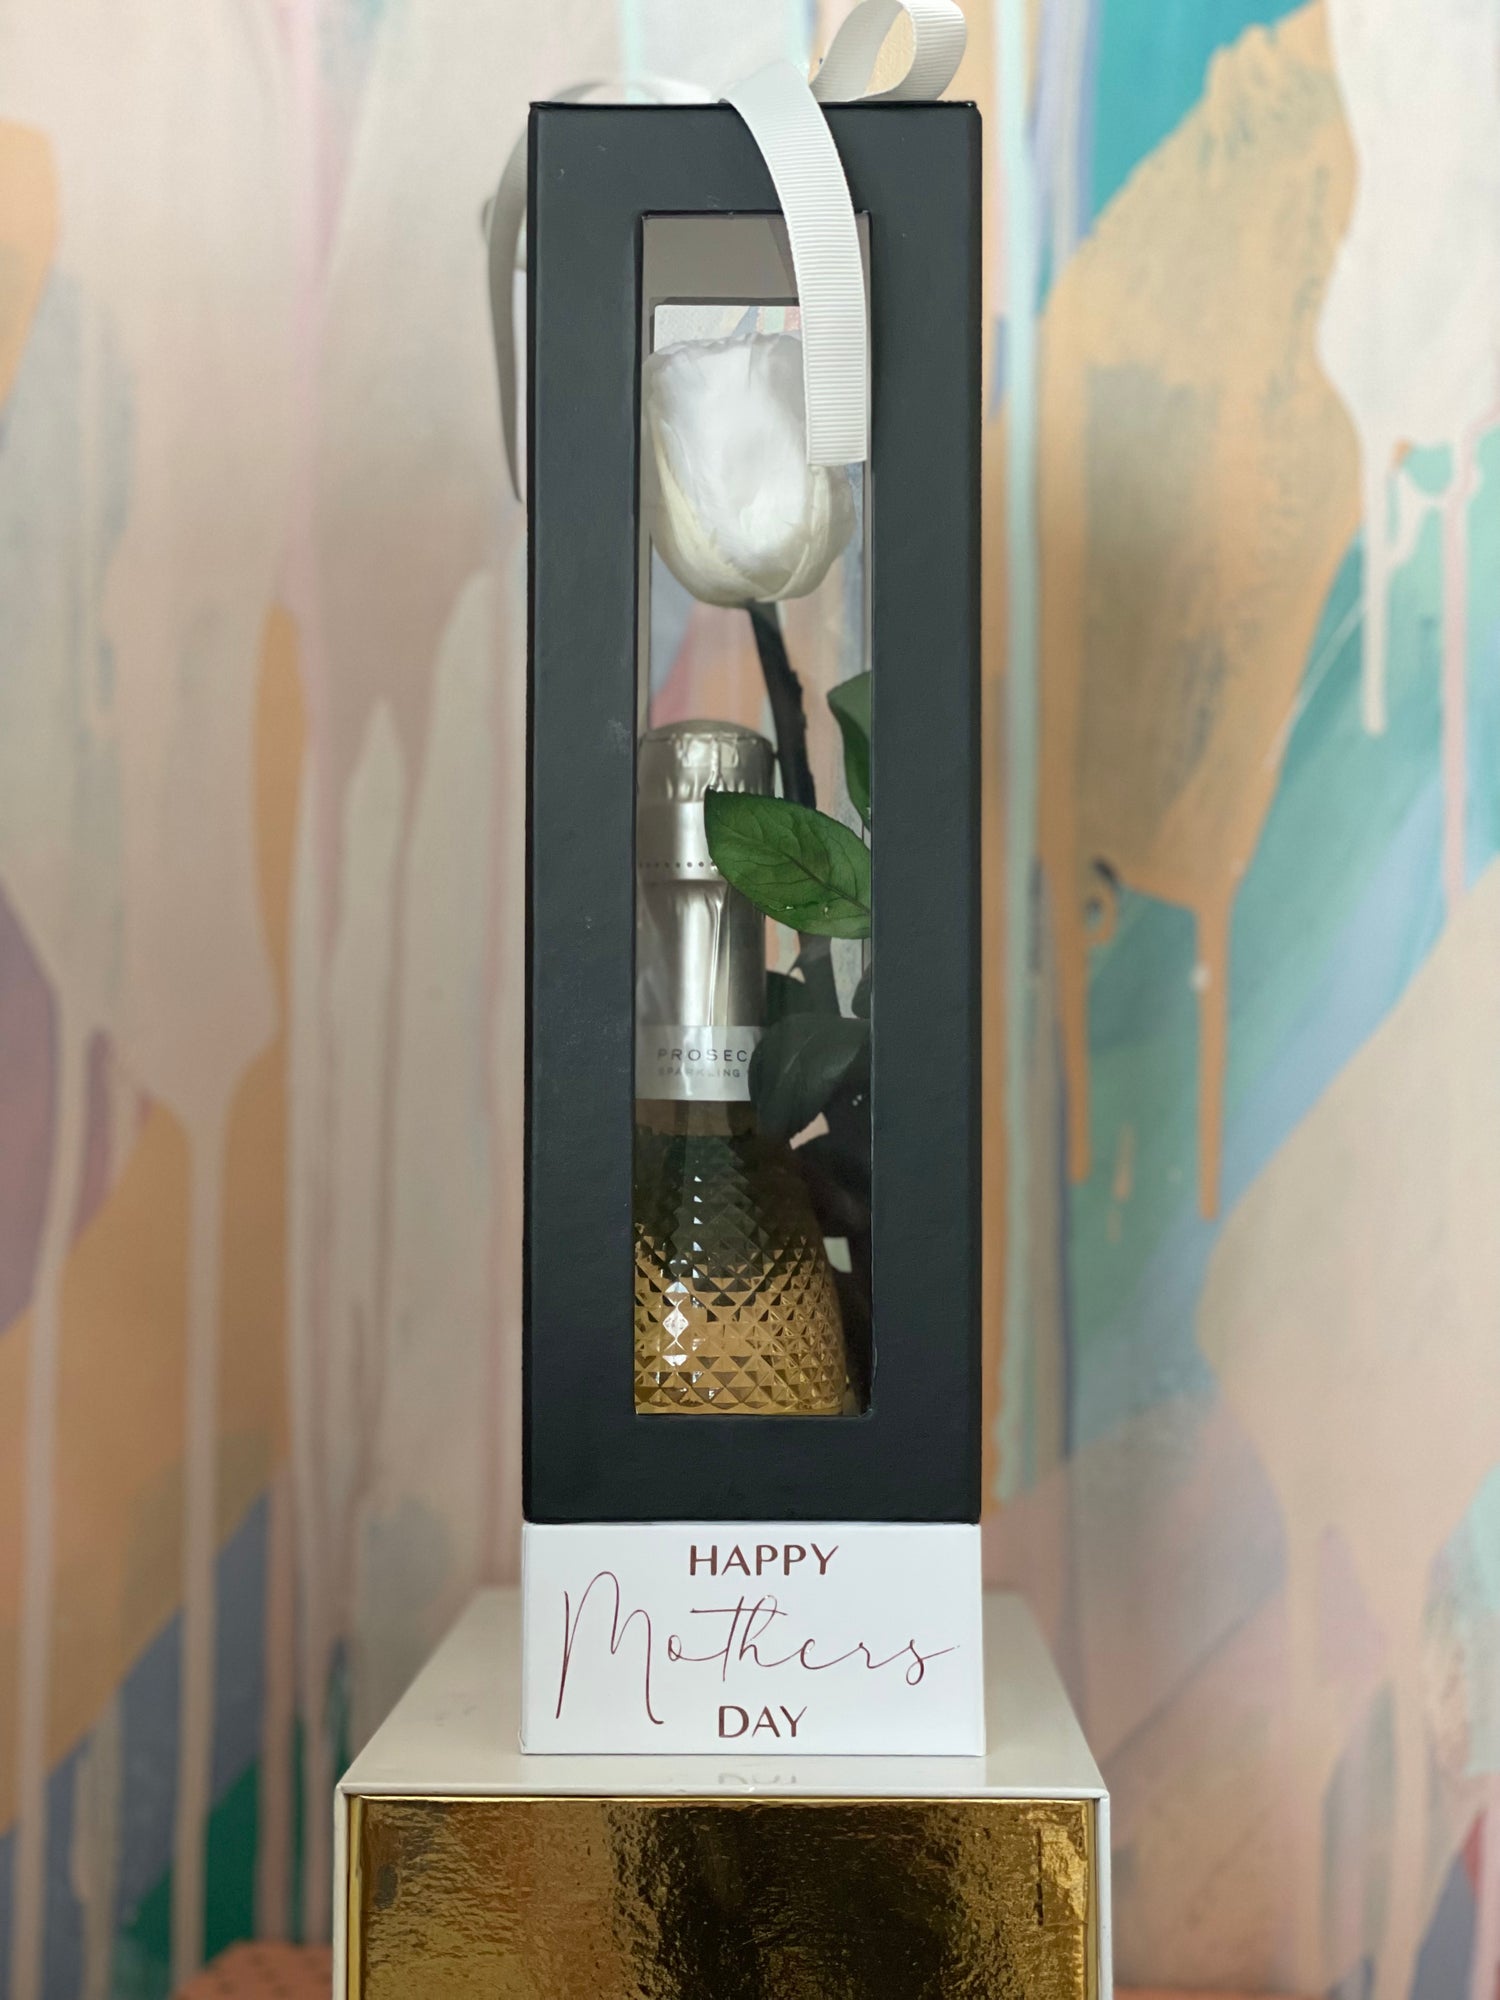 https://xox-with-love.myshopify.com/products/mothers-day-champagne-rose-custom-gift-box?_pos=1&_sid=f9cf8a8f1&_ss=r&variant=39971109666910